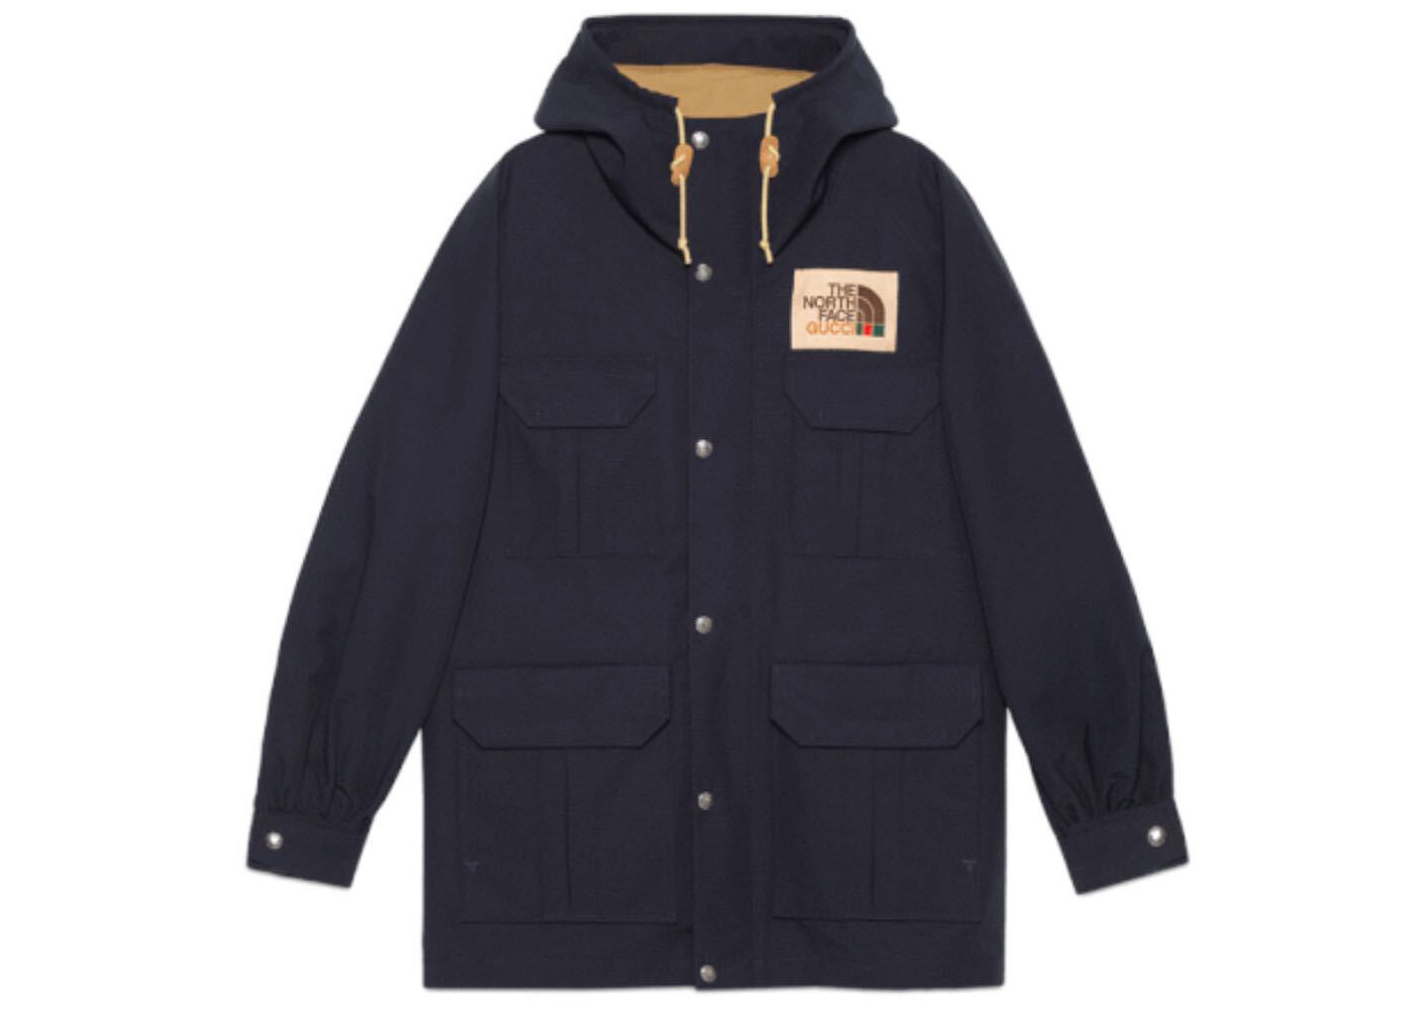 Gucci x The North Face Nylon Mountain Jacket Navy - SS21 Men's - US